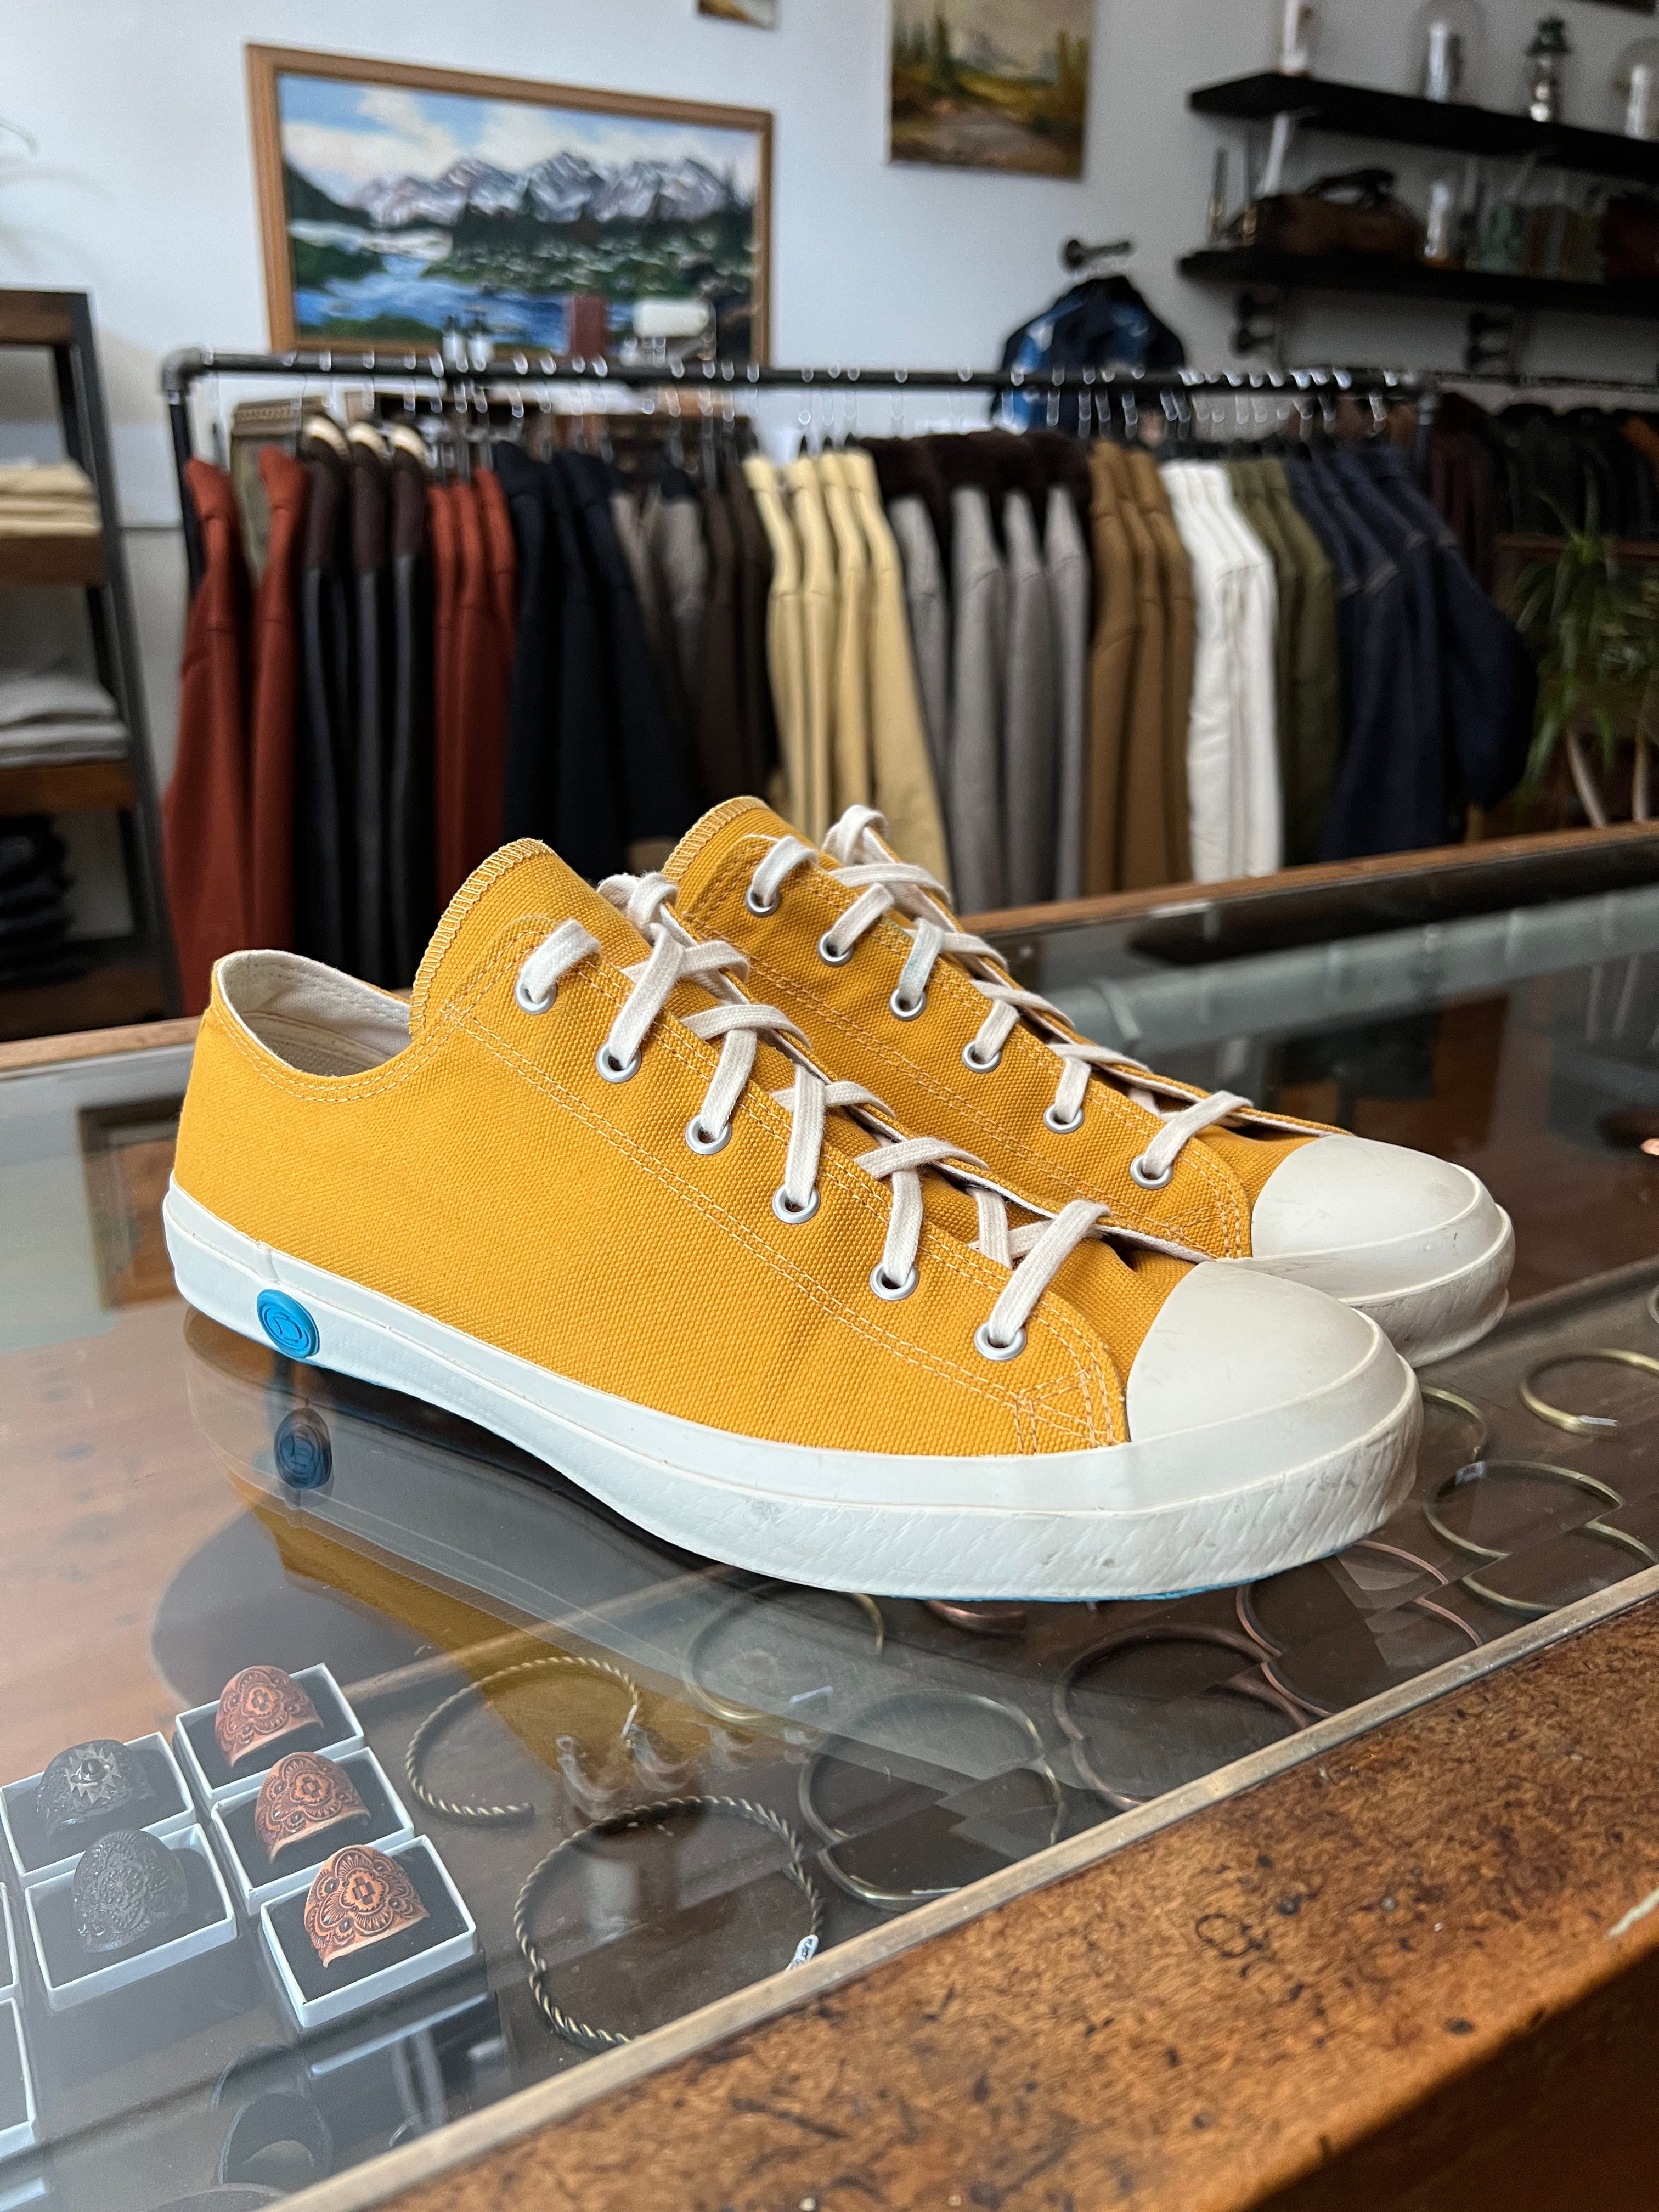 Gently Used Shoes Like Pottery Low Sneakers - Yellow - 10